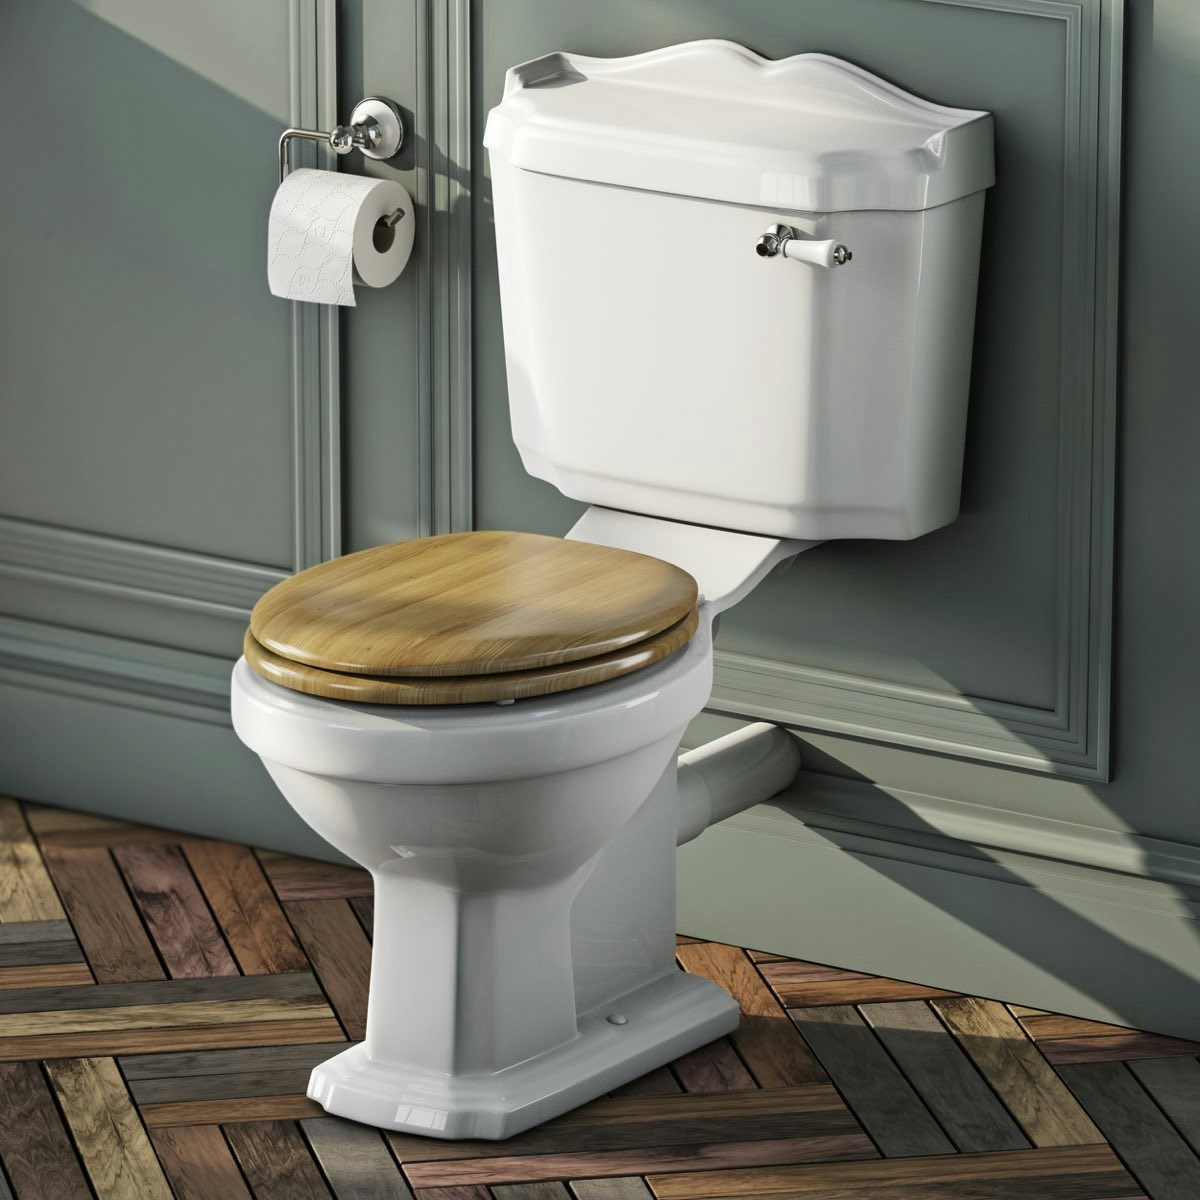 Are toilet seats a standard size?